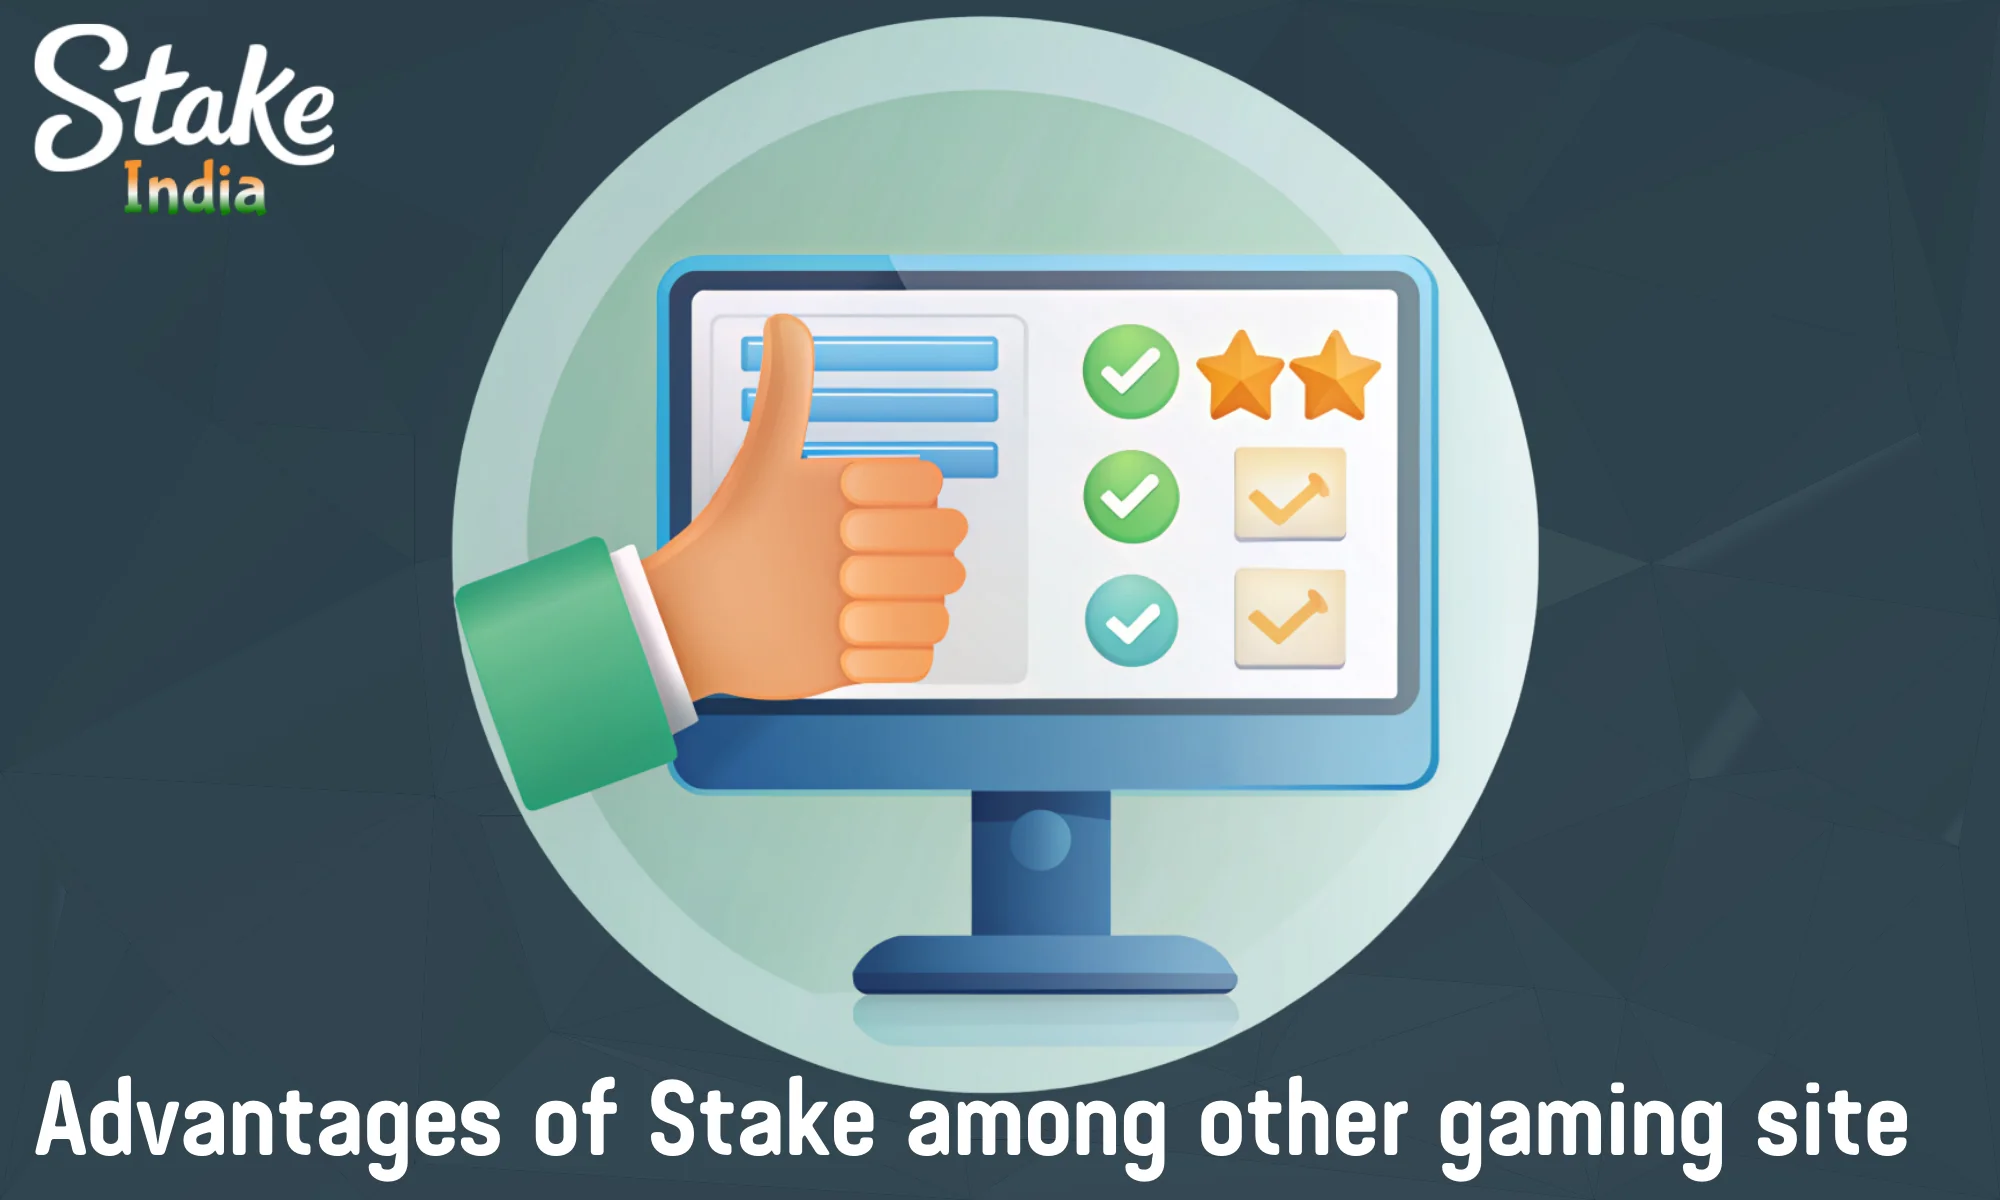 The main advantages that Stake casino provides to Indian players